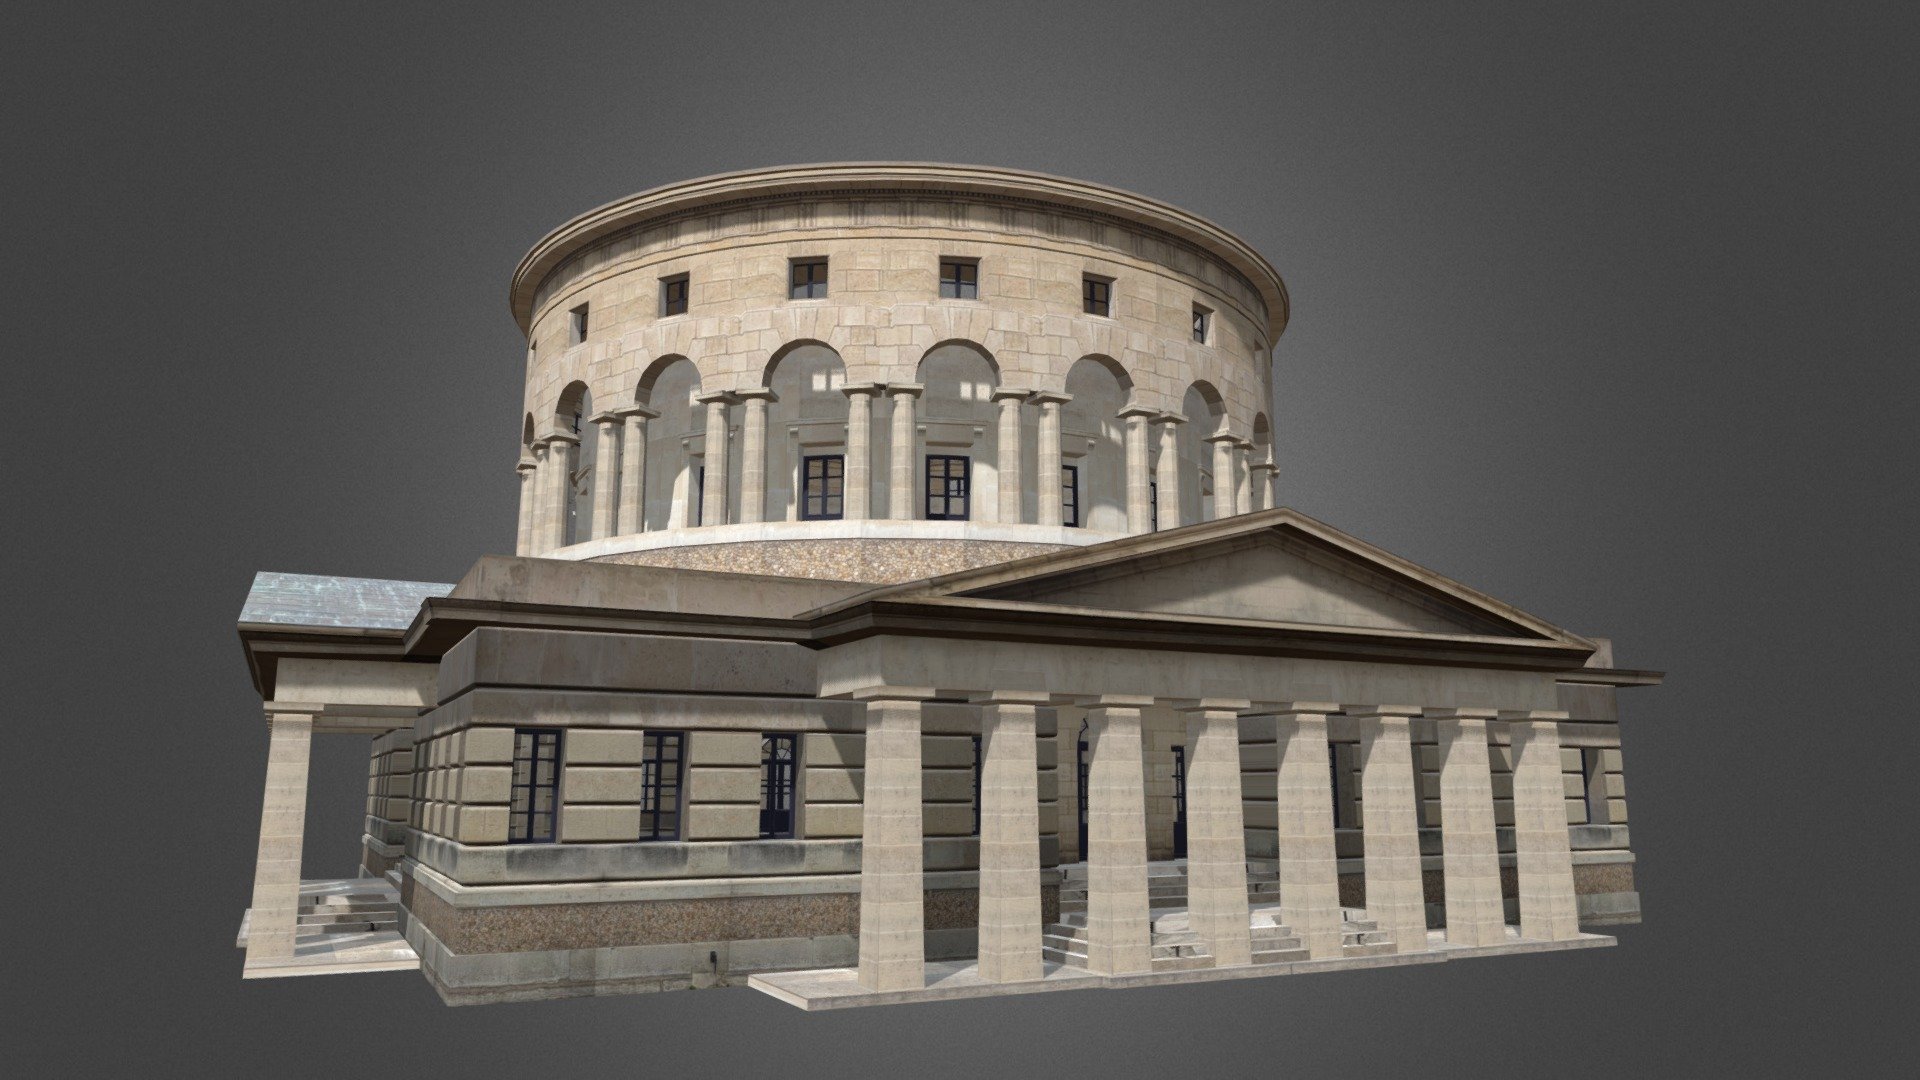 Built between 1784 and 1788, just before the French Revolution. This building still exists today.

Made with Blender.

More about it:
https://fr.wikipedia.org/wiki/Rotonde_de_la_Villette - Barrière Saint-Martin or Rotonde de Stalingrad - Download Free 3D model by Paris1850 3d model